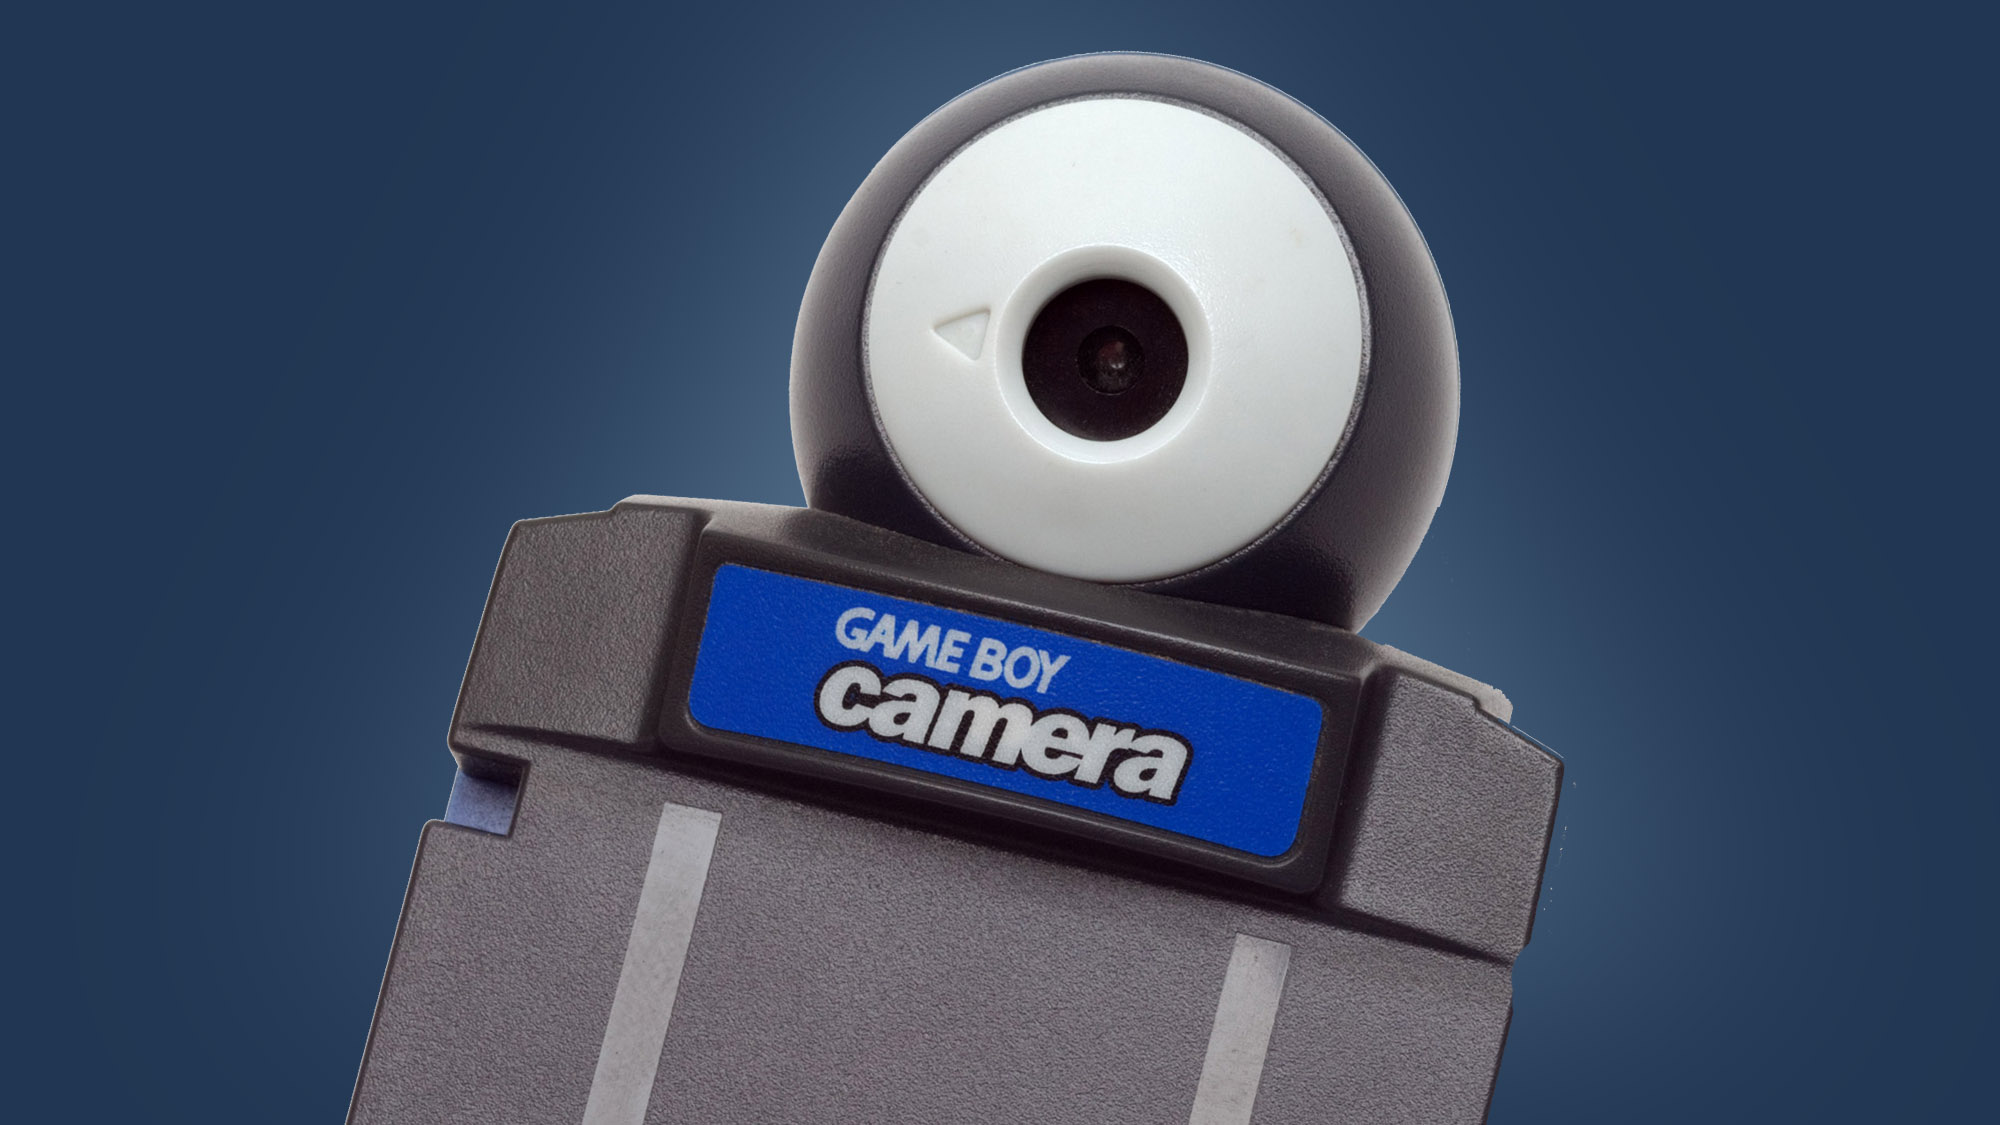 Hacker somehow mods original Game Boy Camera to work with Canon DSLR lenses